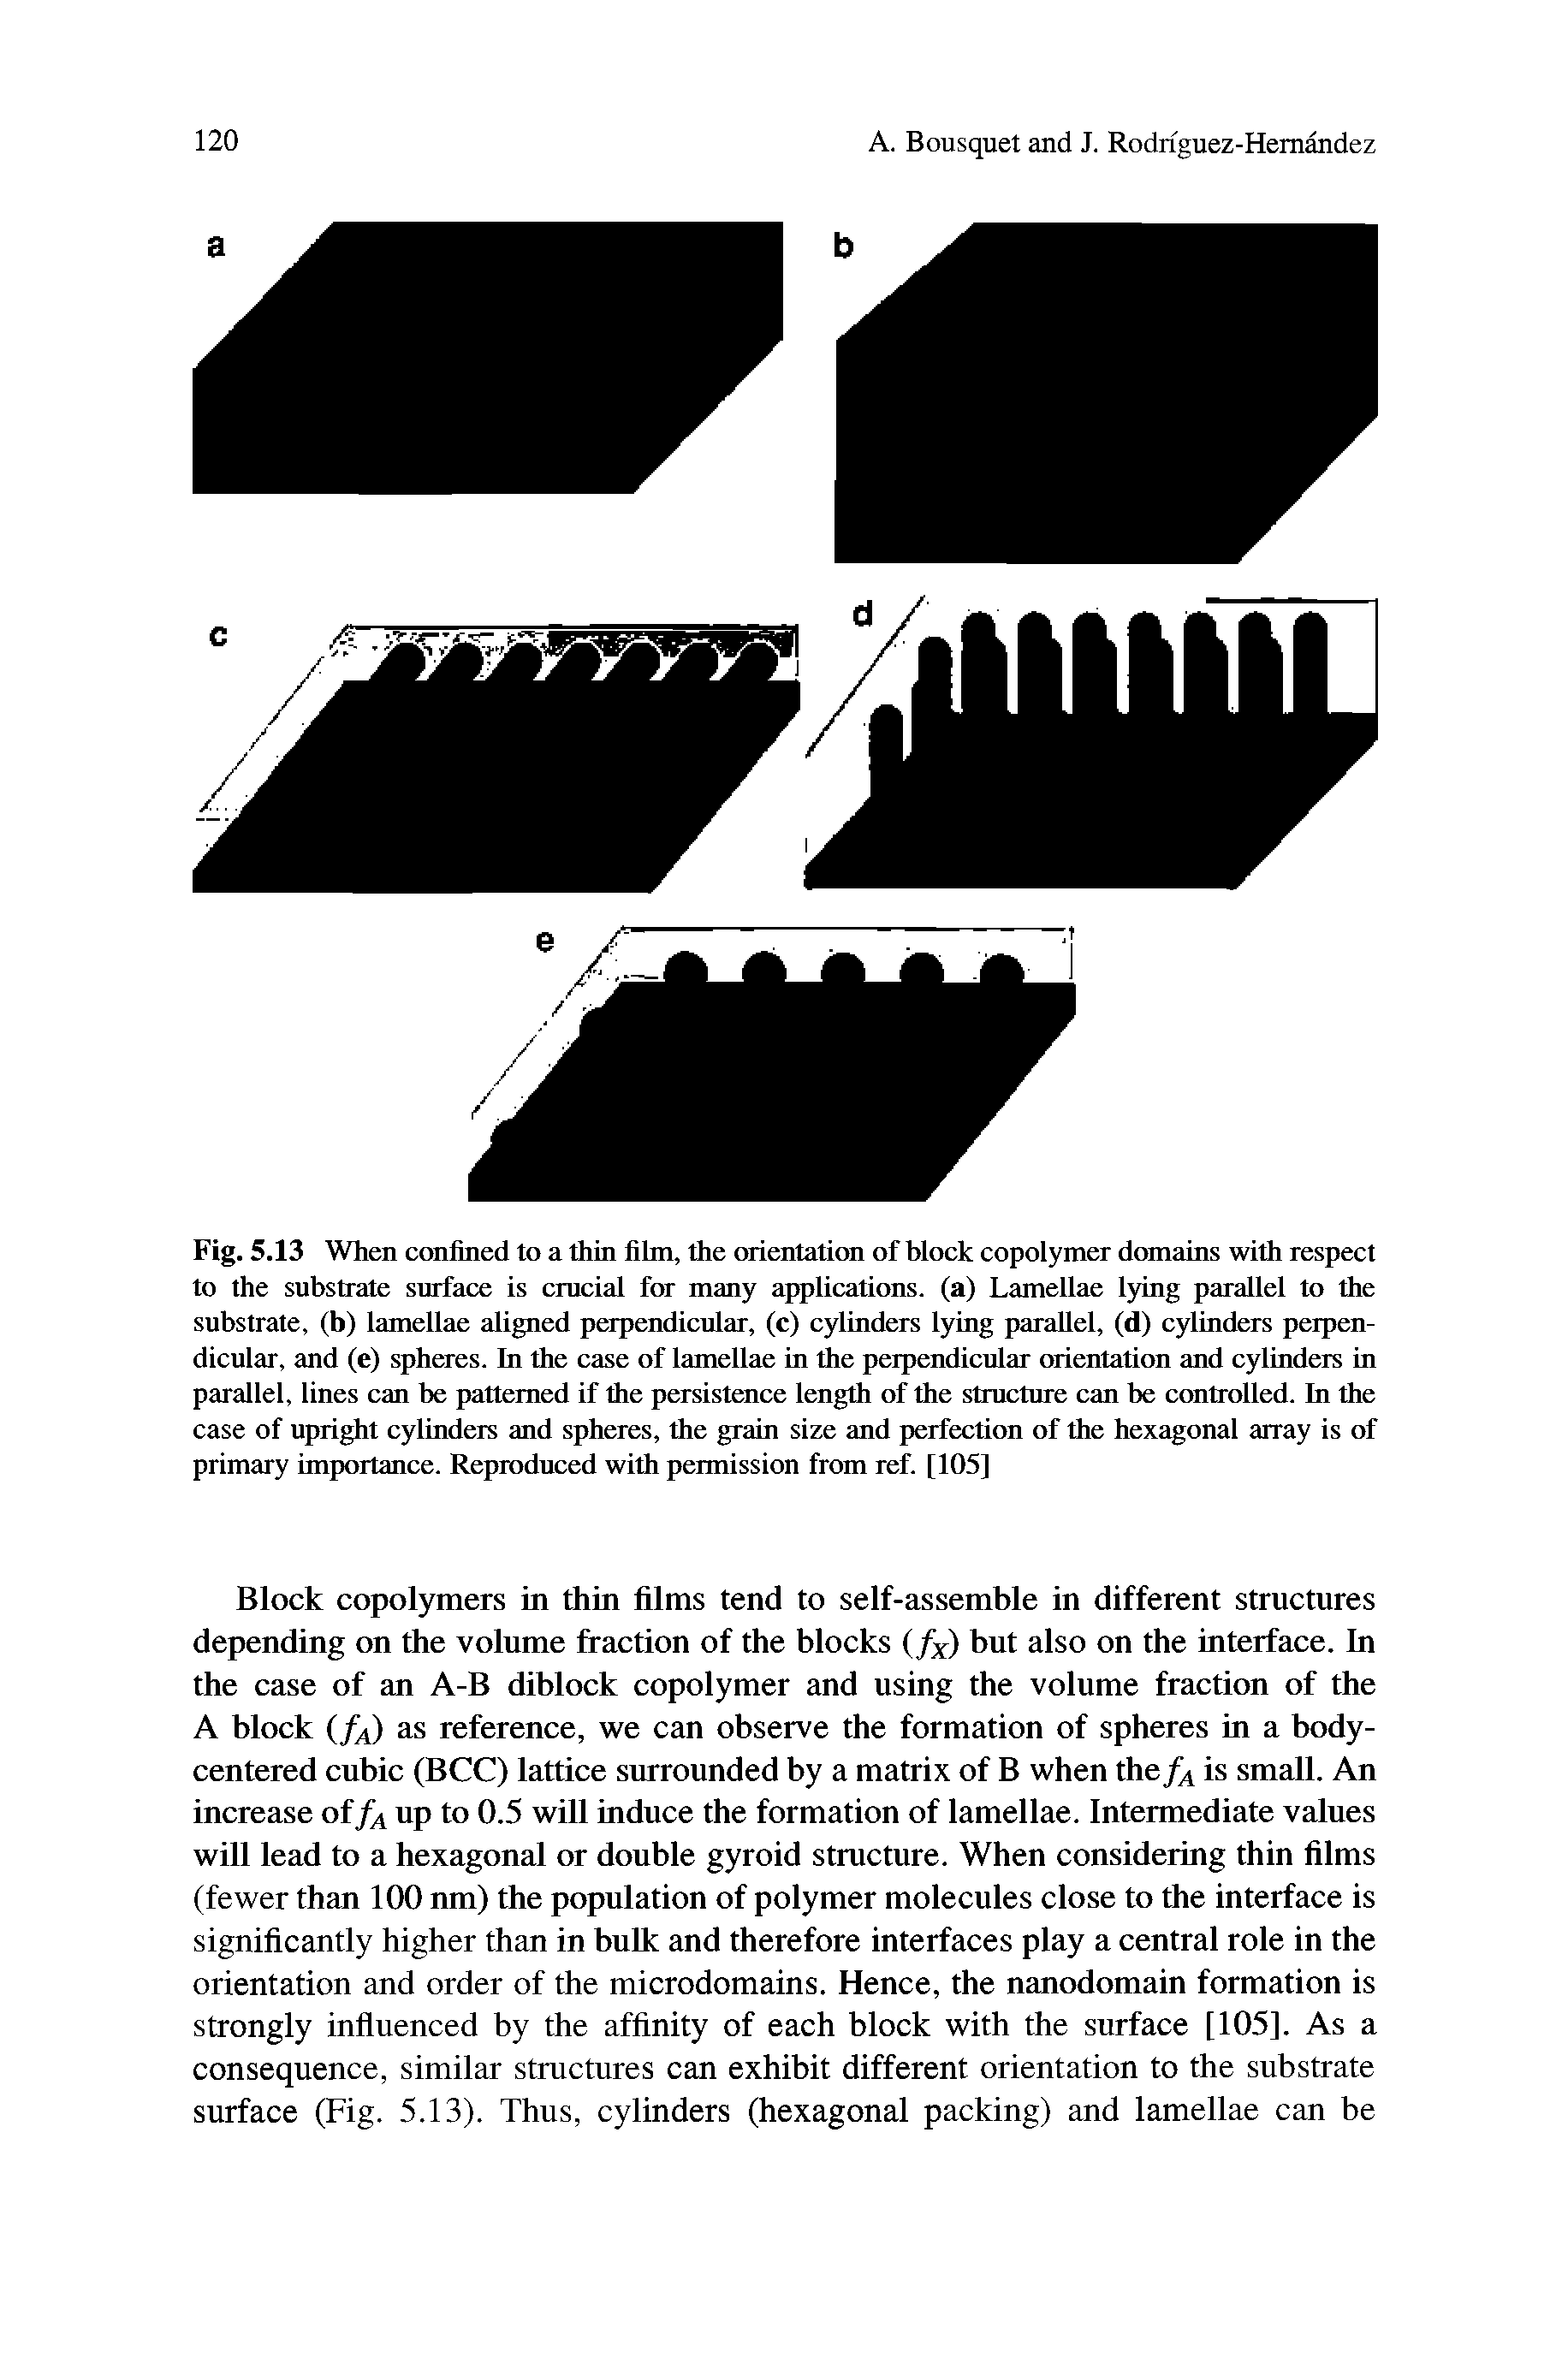 Fig. 5.13 When confined to a thin fihn, the orientation of block copolymer domains with respect to the substrate surface is crucial for many applications, (a) Lamellae lying parallel to the substrate, (b) lamellae aligned perpendicular, (c) cylinders lying parallel, (d) cylinders perpendicular, and (e) spheres. In the case of lamellae in the perpendicular orientation and cylinders in parallel, lines can be patterned if the persistence length of the structure can be controlled. In the case of upright cylinders and spheres, the grain size and perfection of the hexagonal array is of primary importance. Reproduced with permission from ref. [105]...